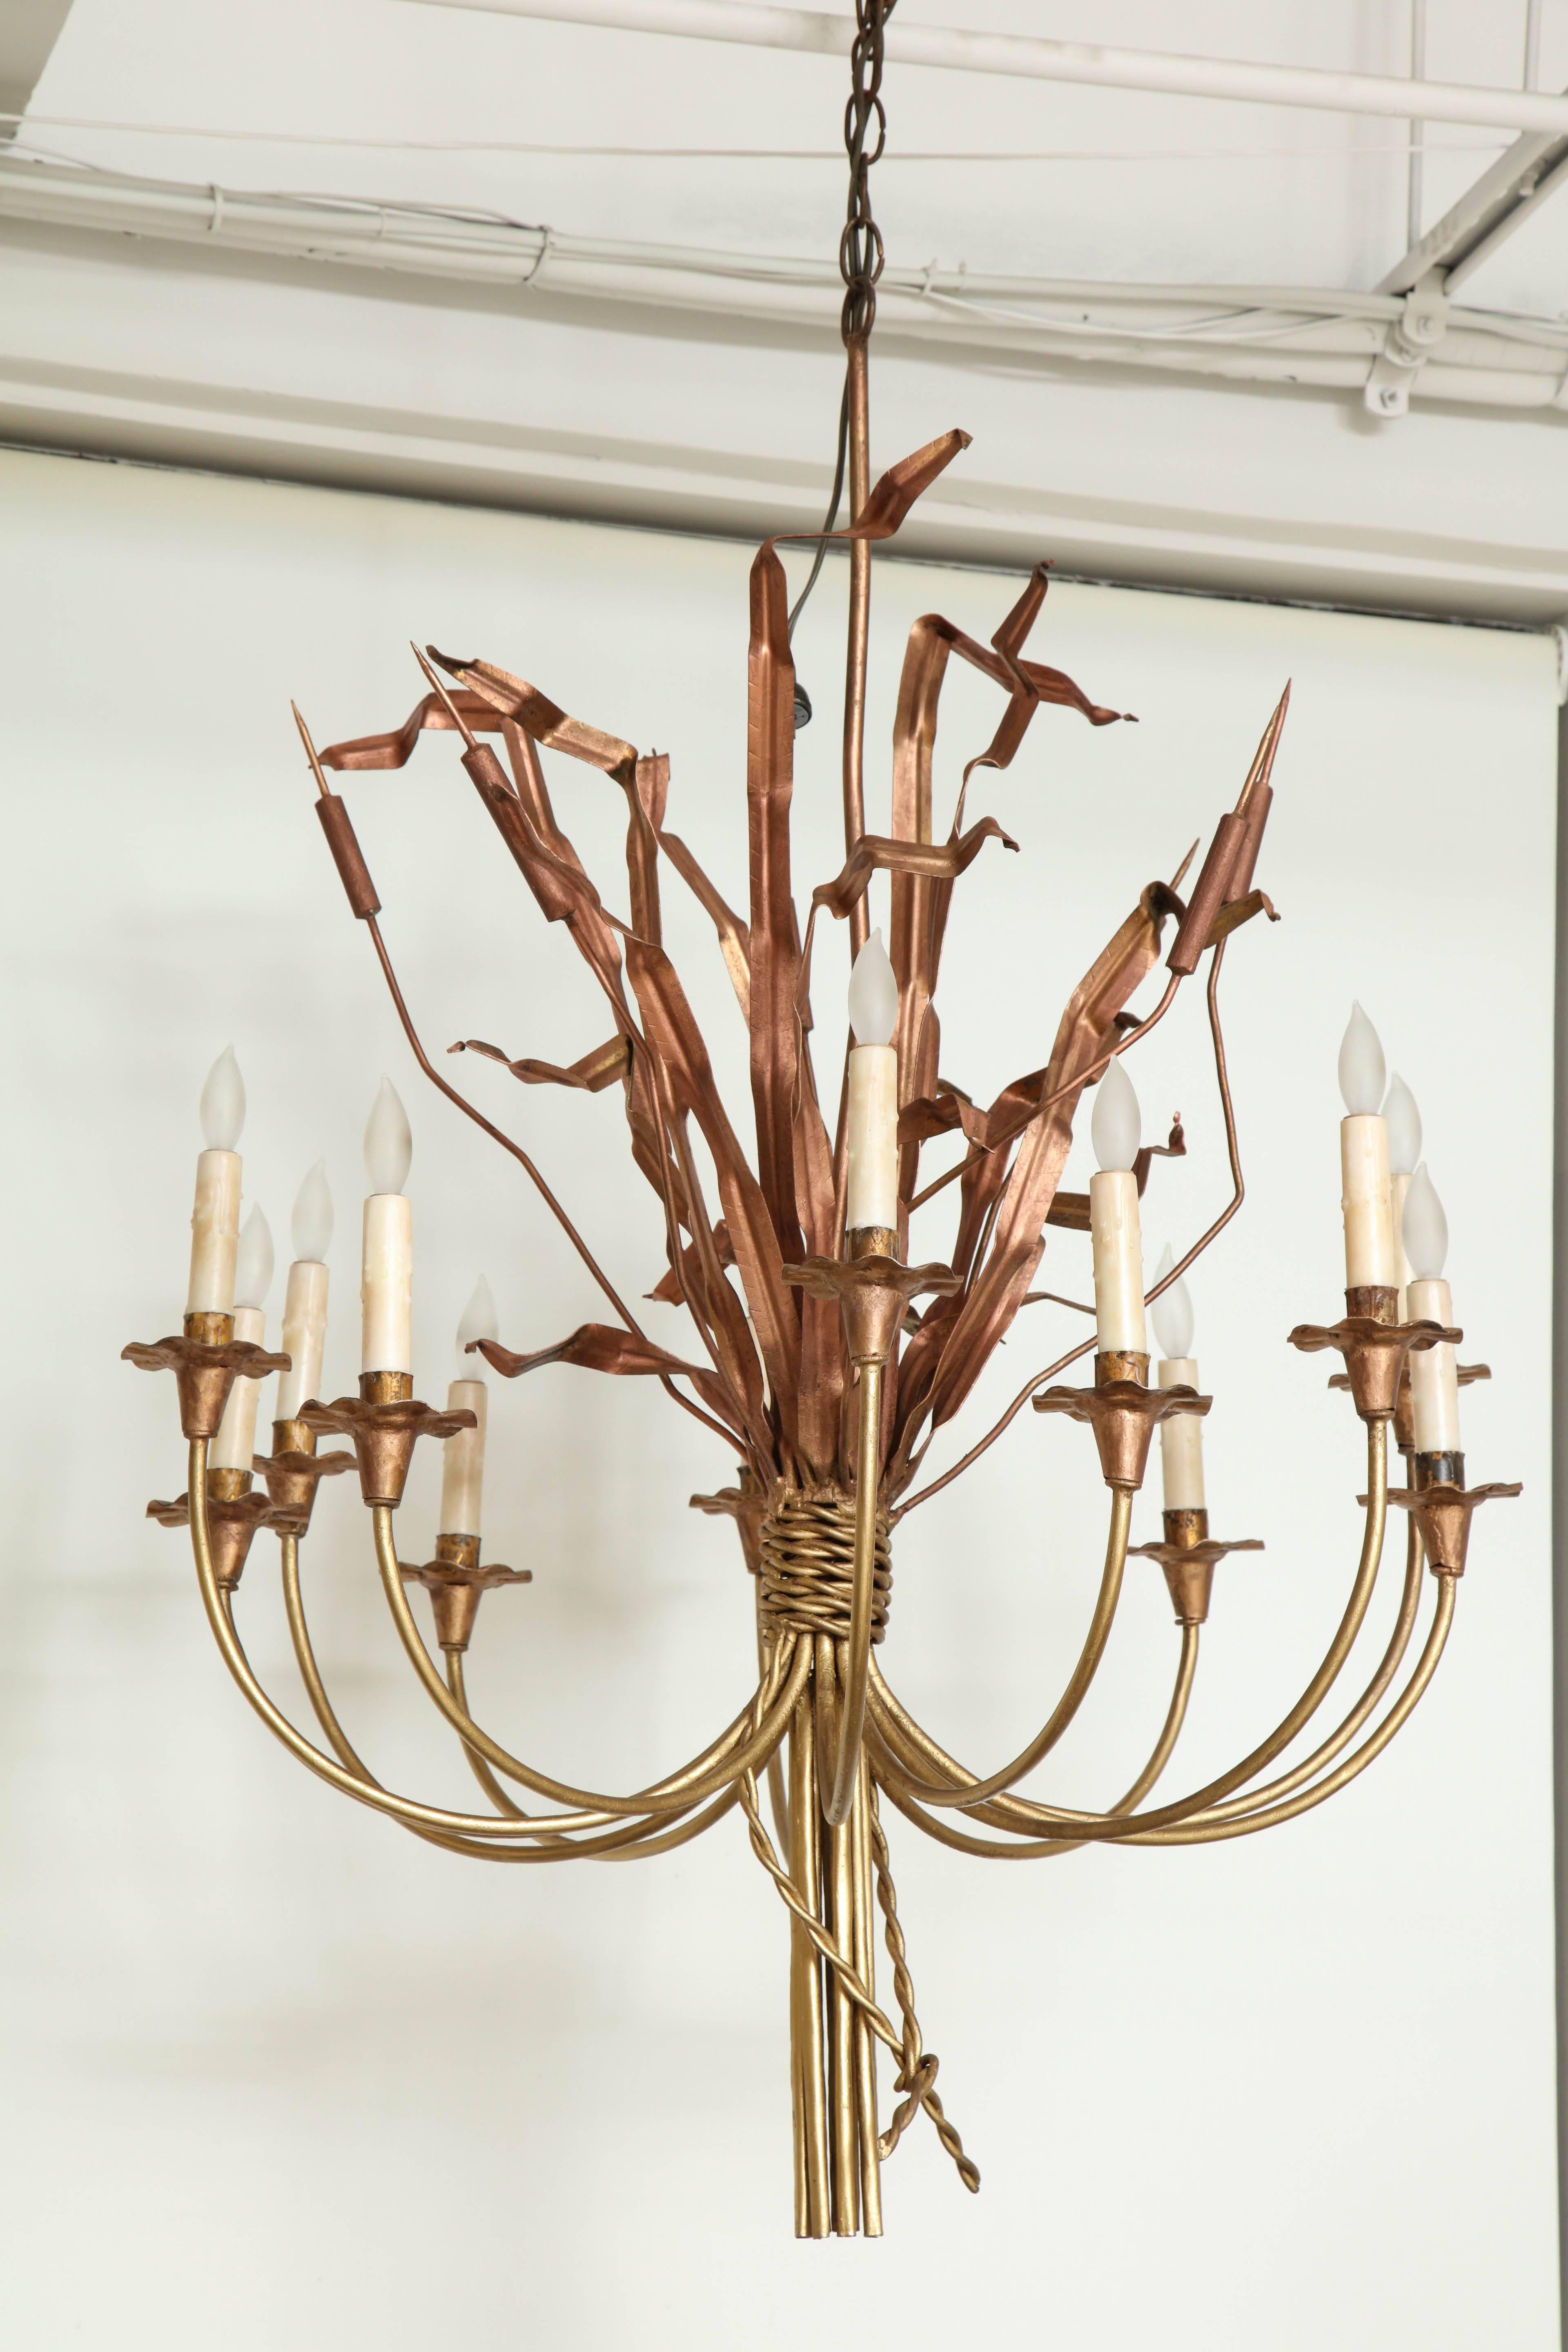 12 lights surround a bundle of cattails on this unique gilded chandelier